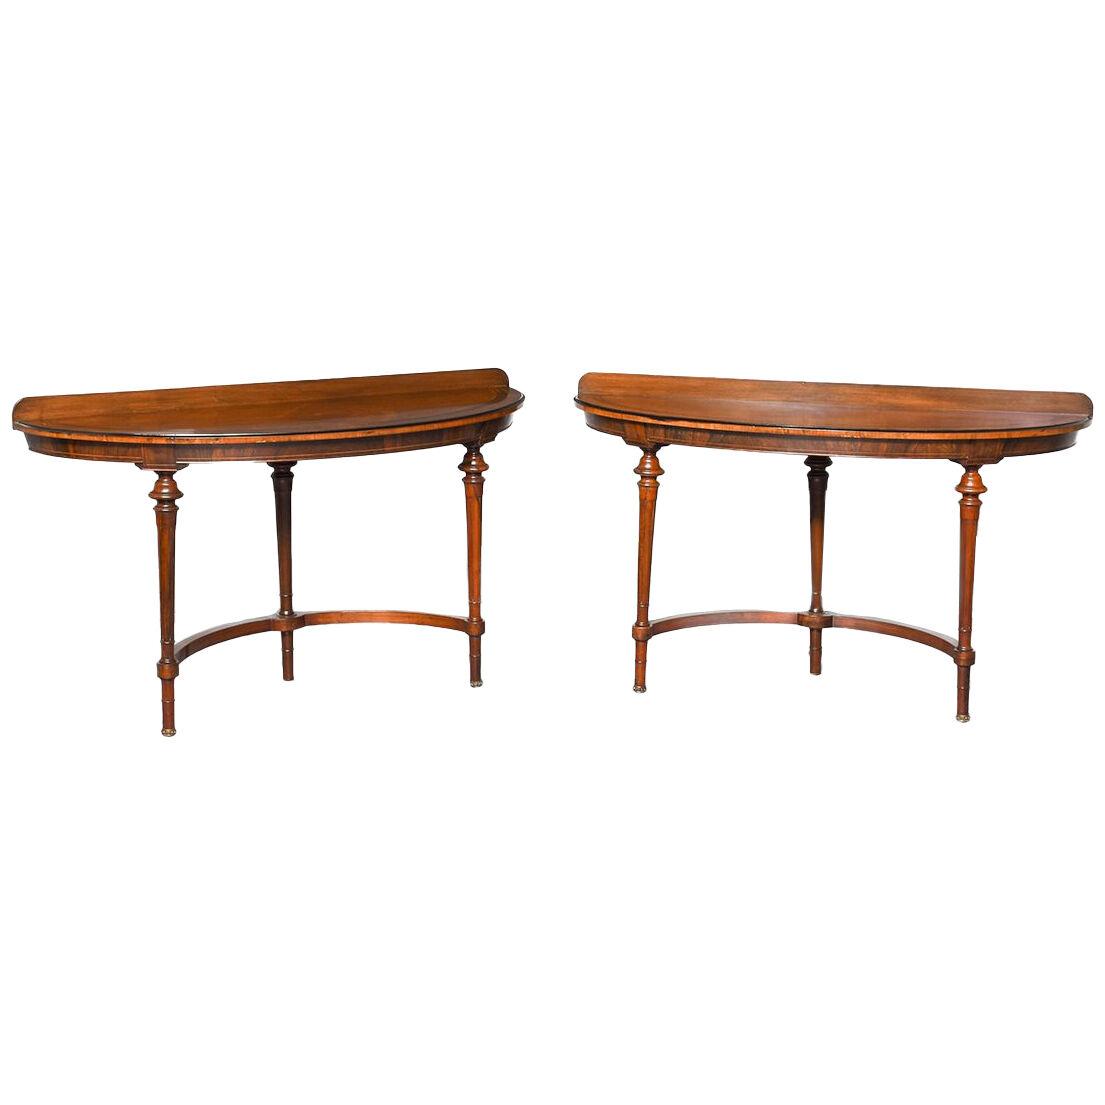 Pair of Victorian Inlaid Rosewood Demilune Hall Table